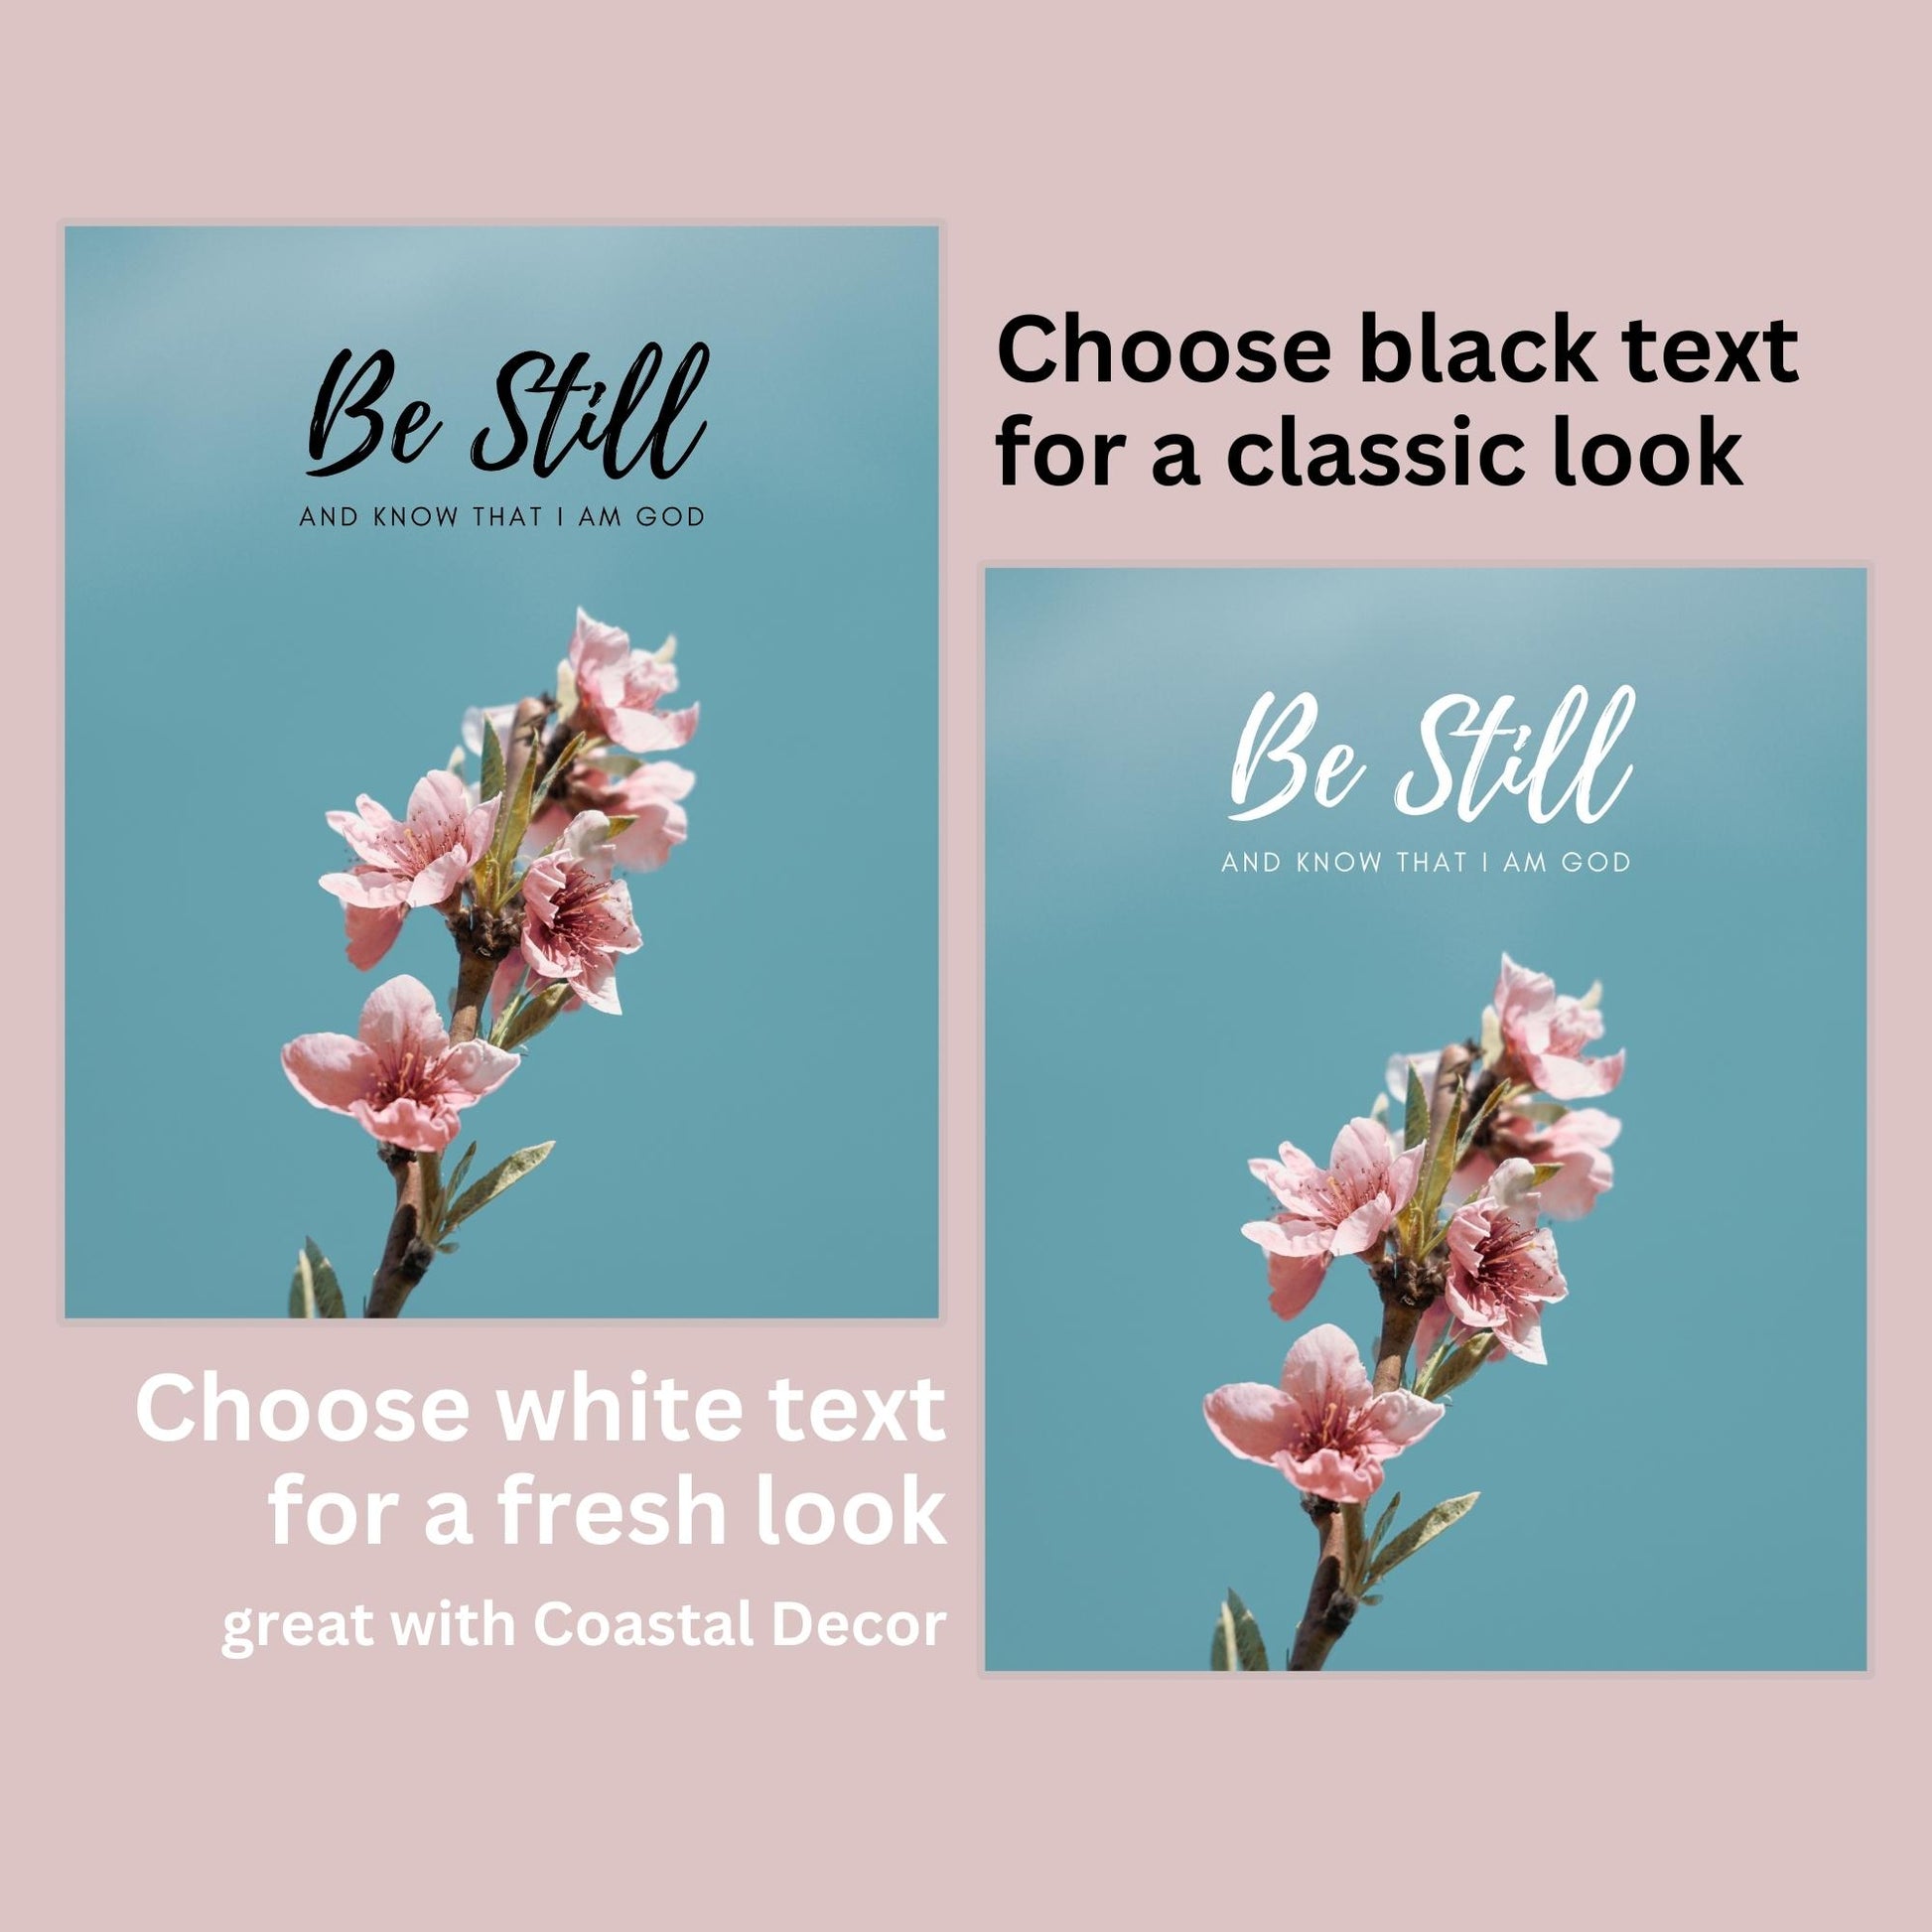 Inspirational Word Art - Be Still and know that I am God - Flower Design Wall Decor (8X10 print) choose from 2 text colors | both shown - black text for a classic look or white text for a fresh look (great with Coastal Decor | oak7west.com